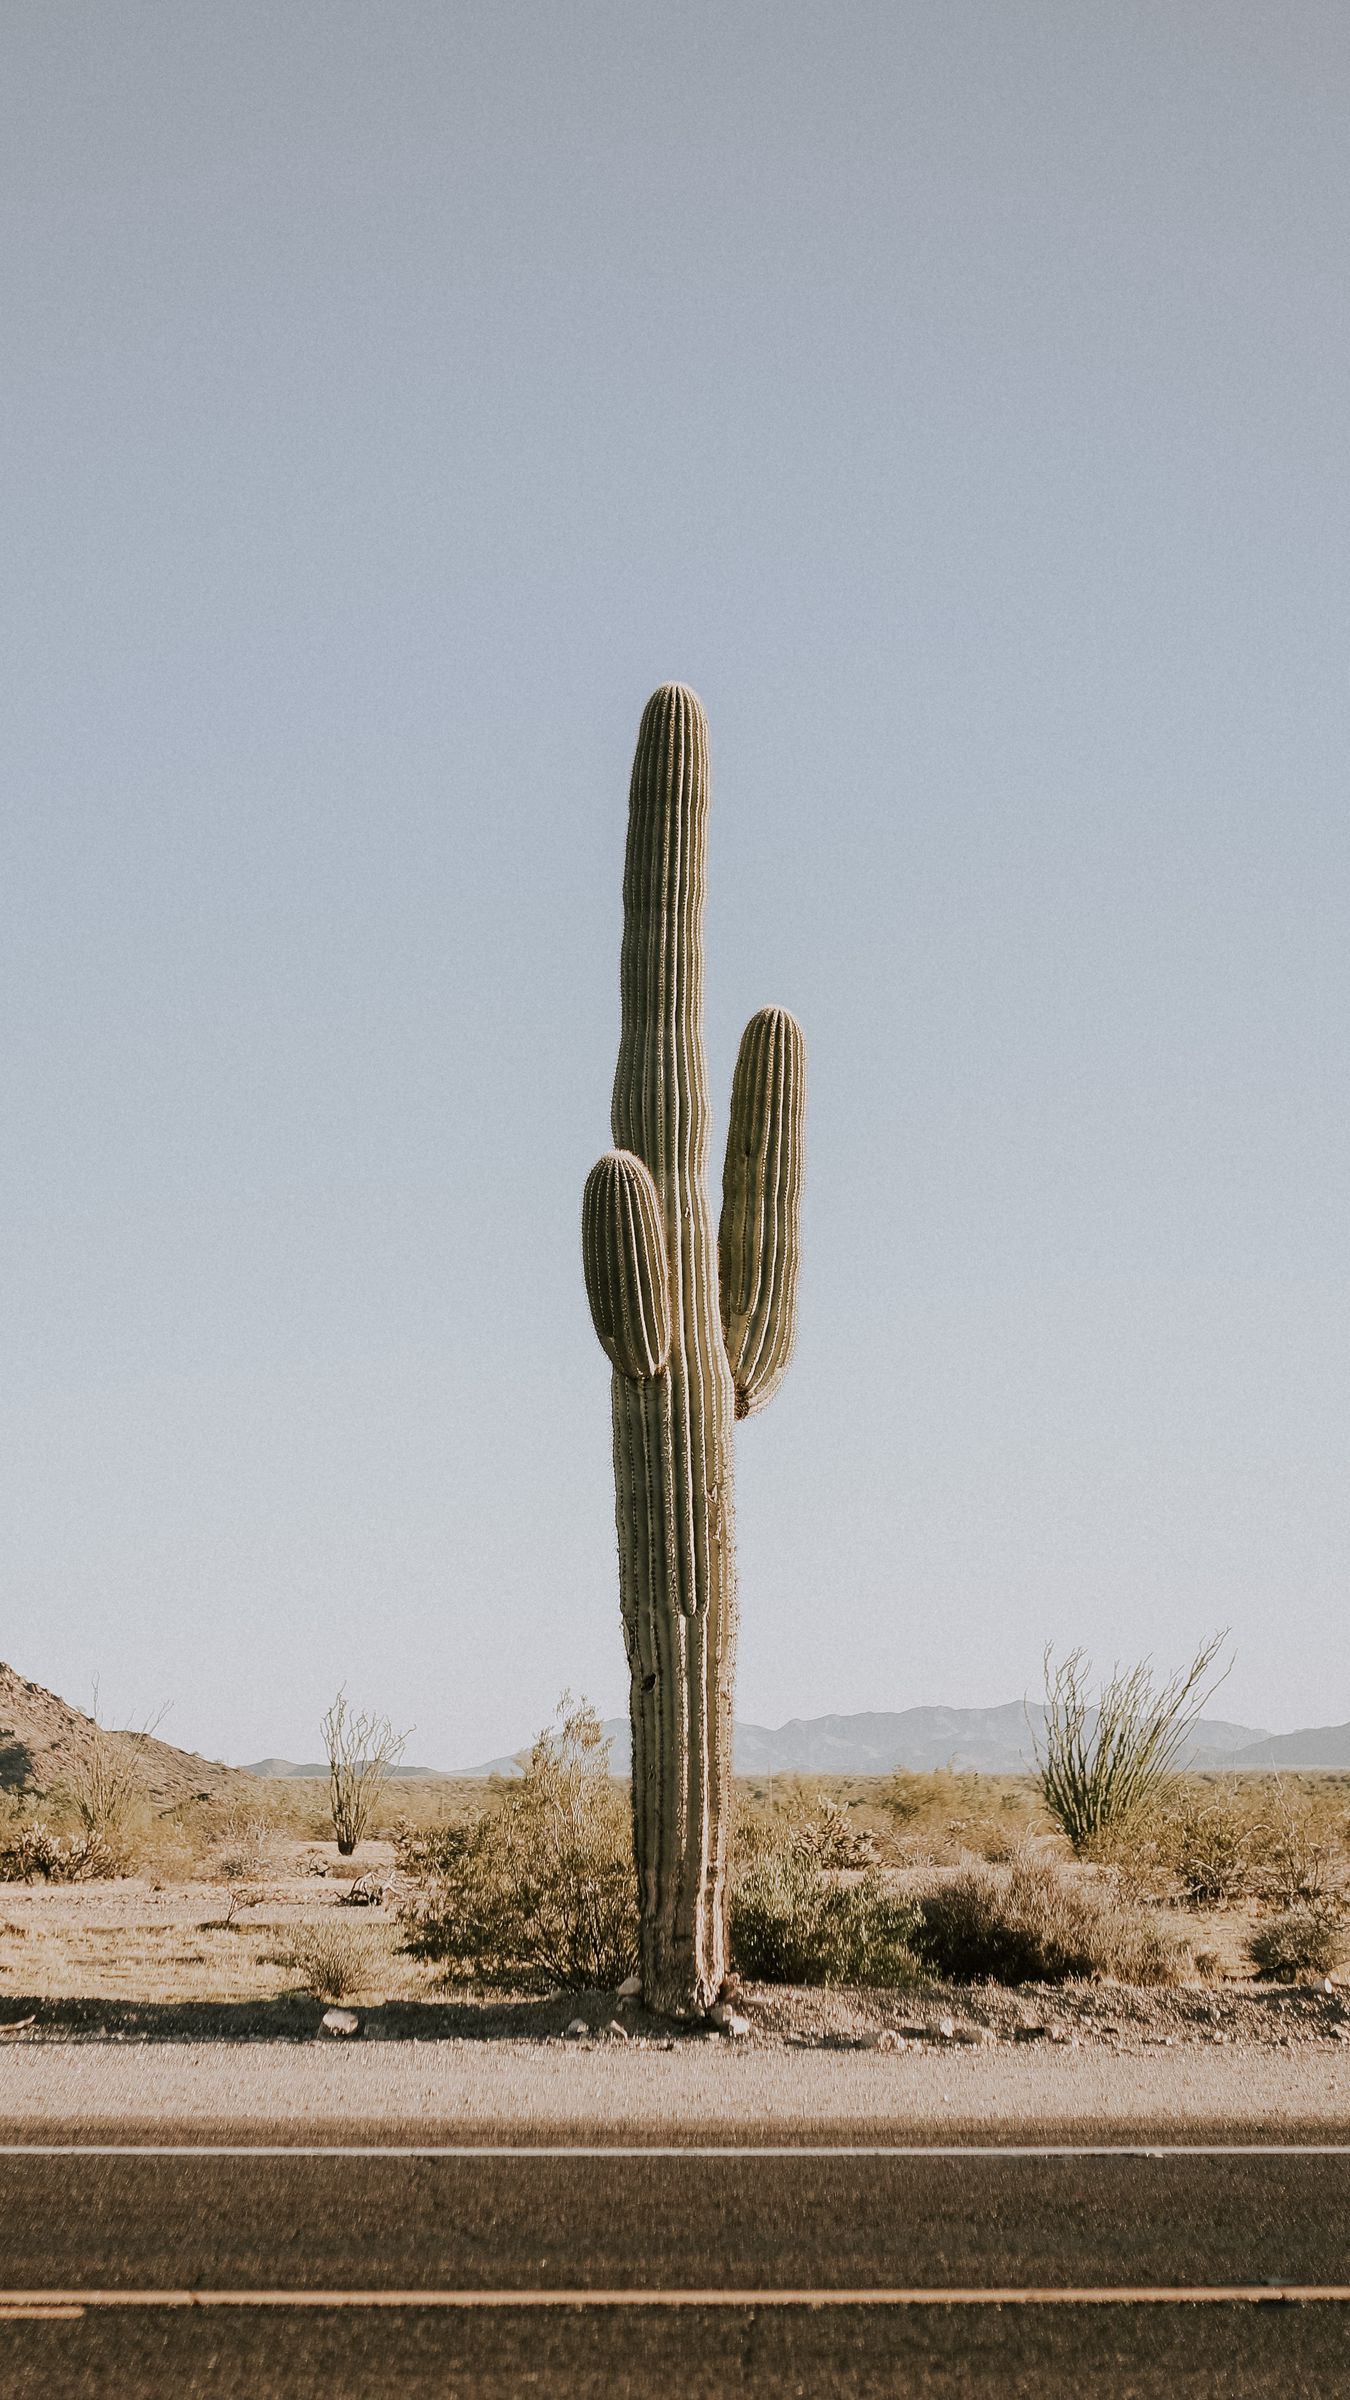 Download wallpaper 1350x2400 cactus, road, desert, mountains iphone  8+/7+/6s+/6+ for parallax hd background